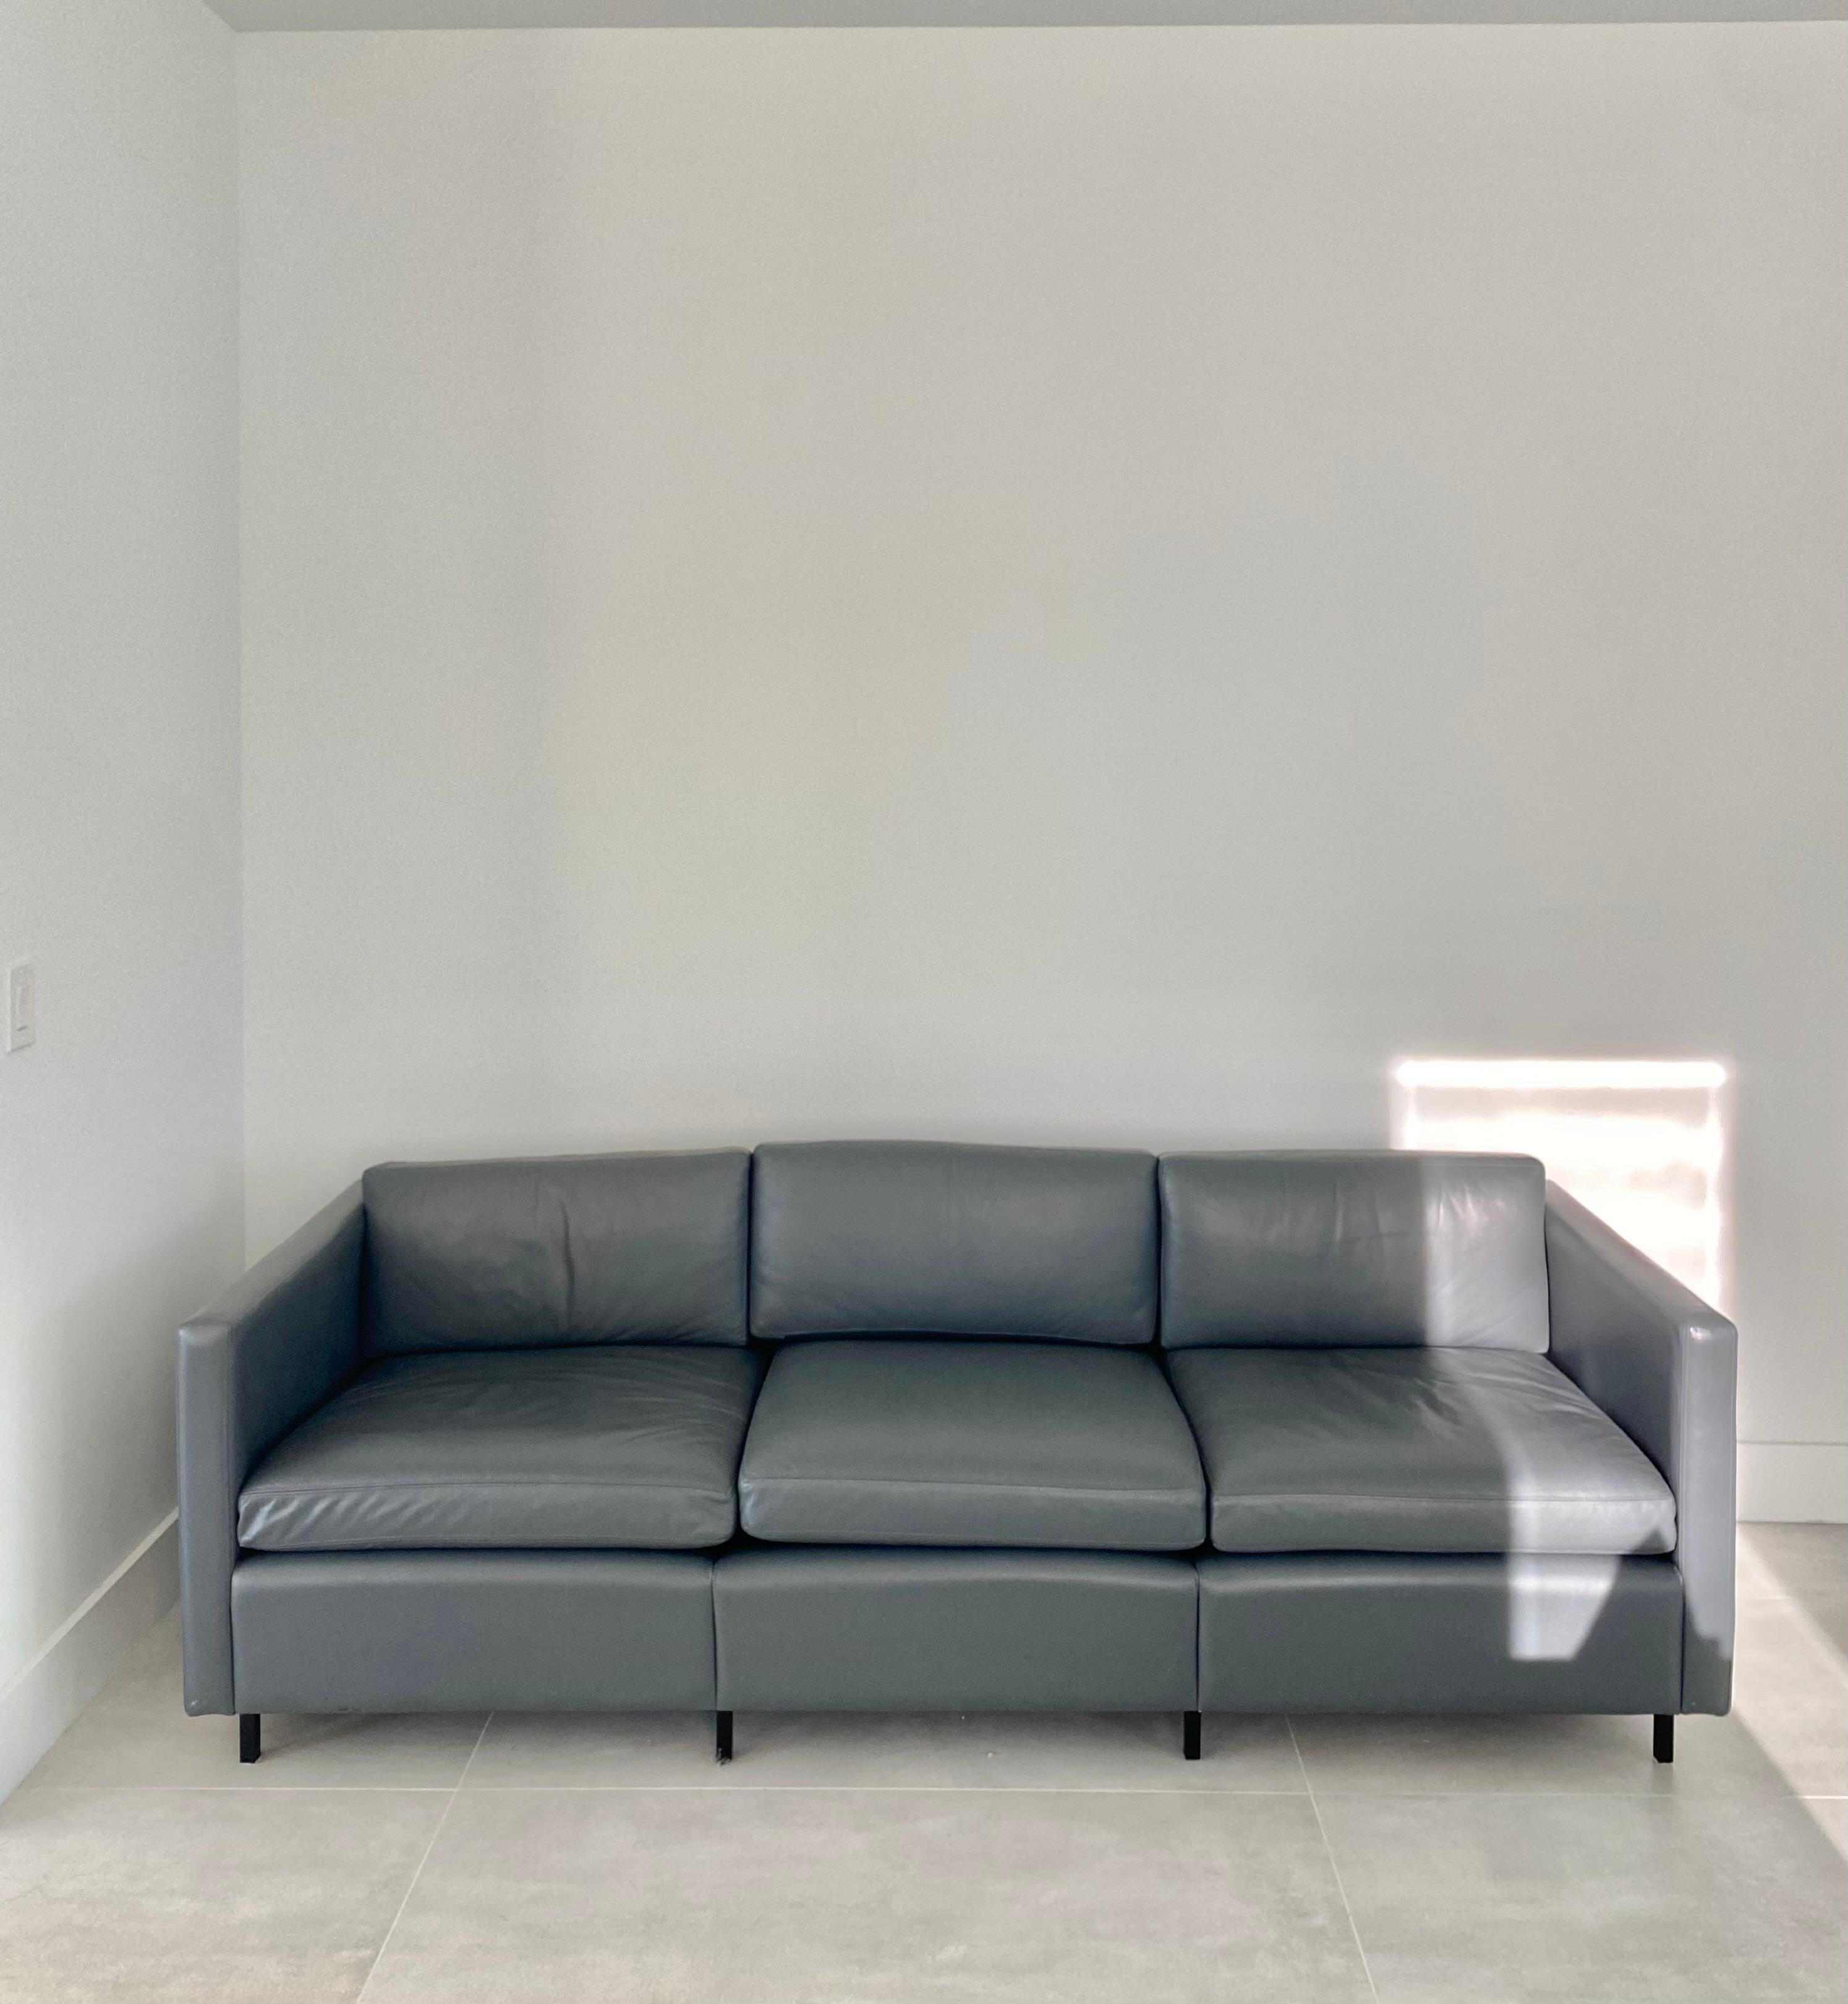 20th Century Minimalist Modernist Knoll Charles Pfister in Gray Leather Sofa For Sale